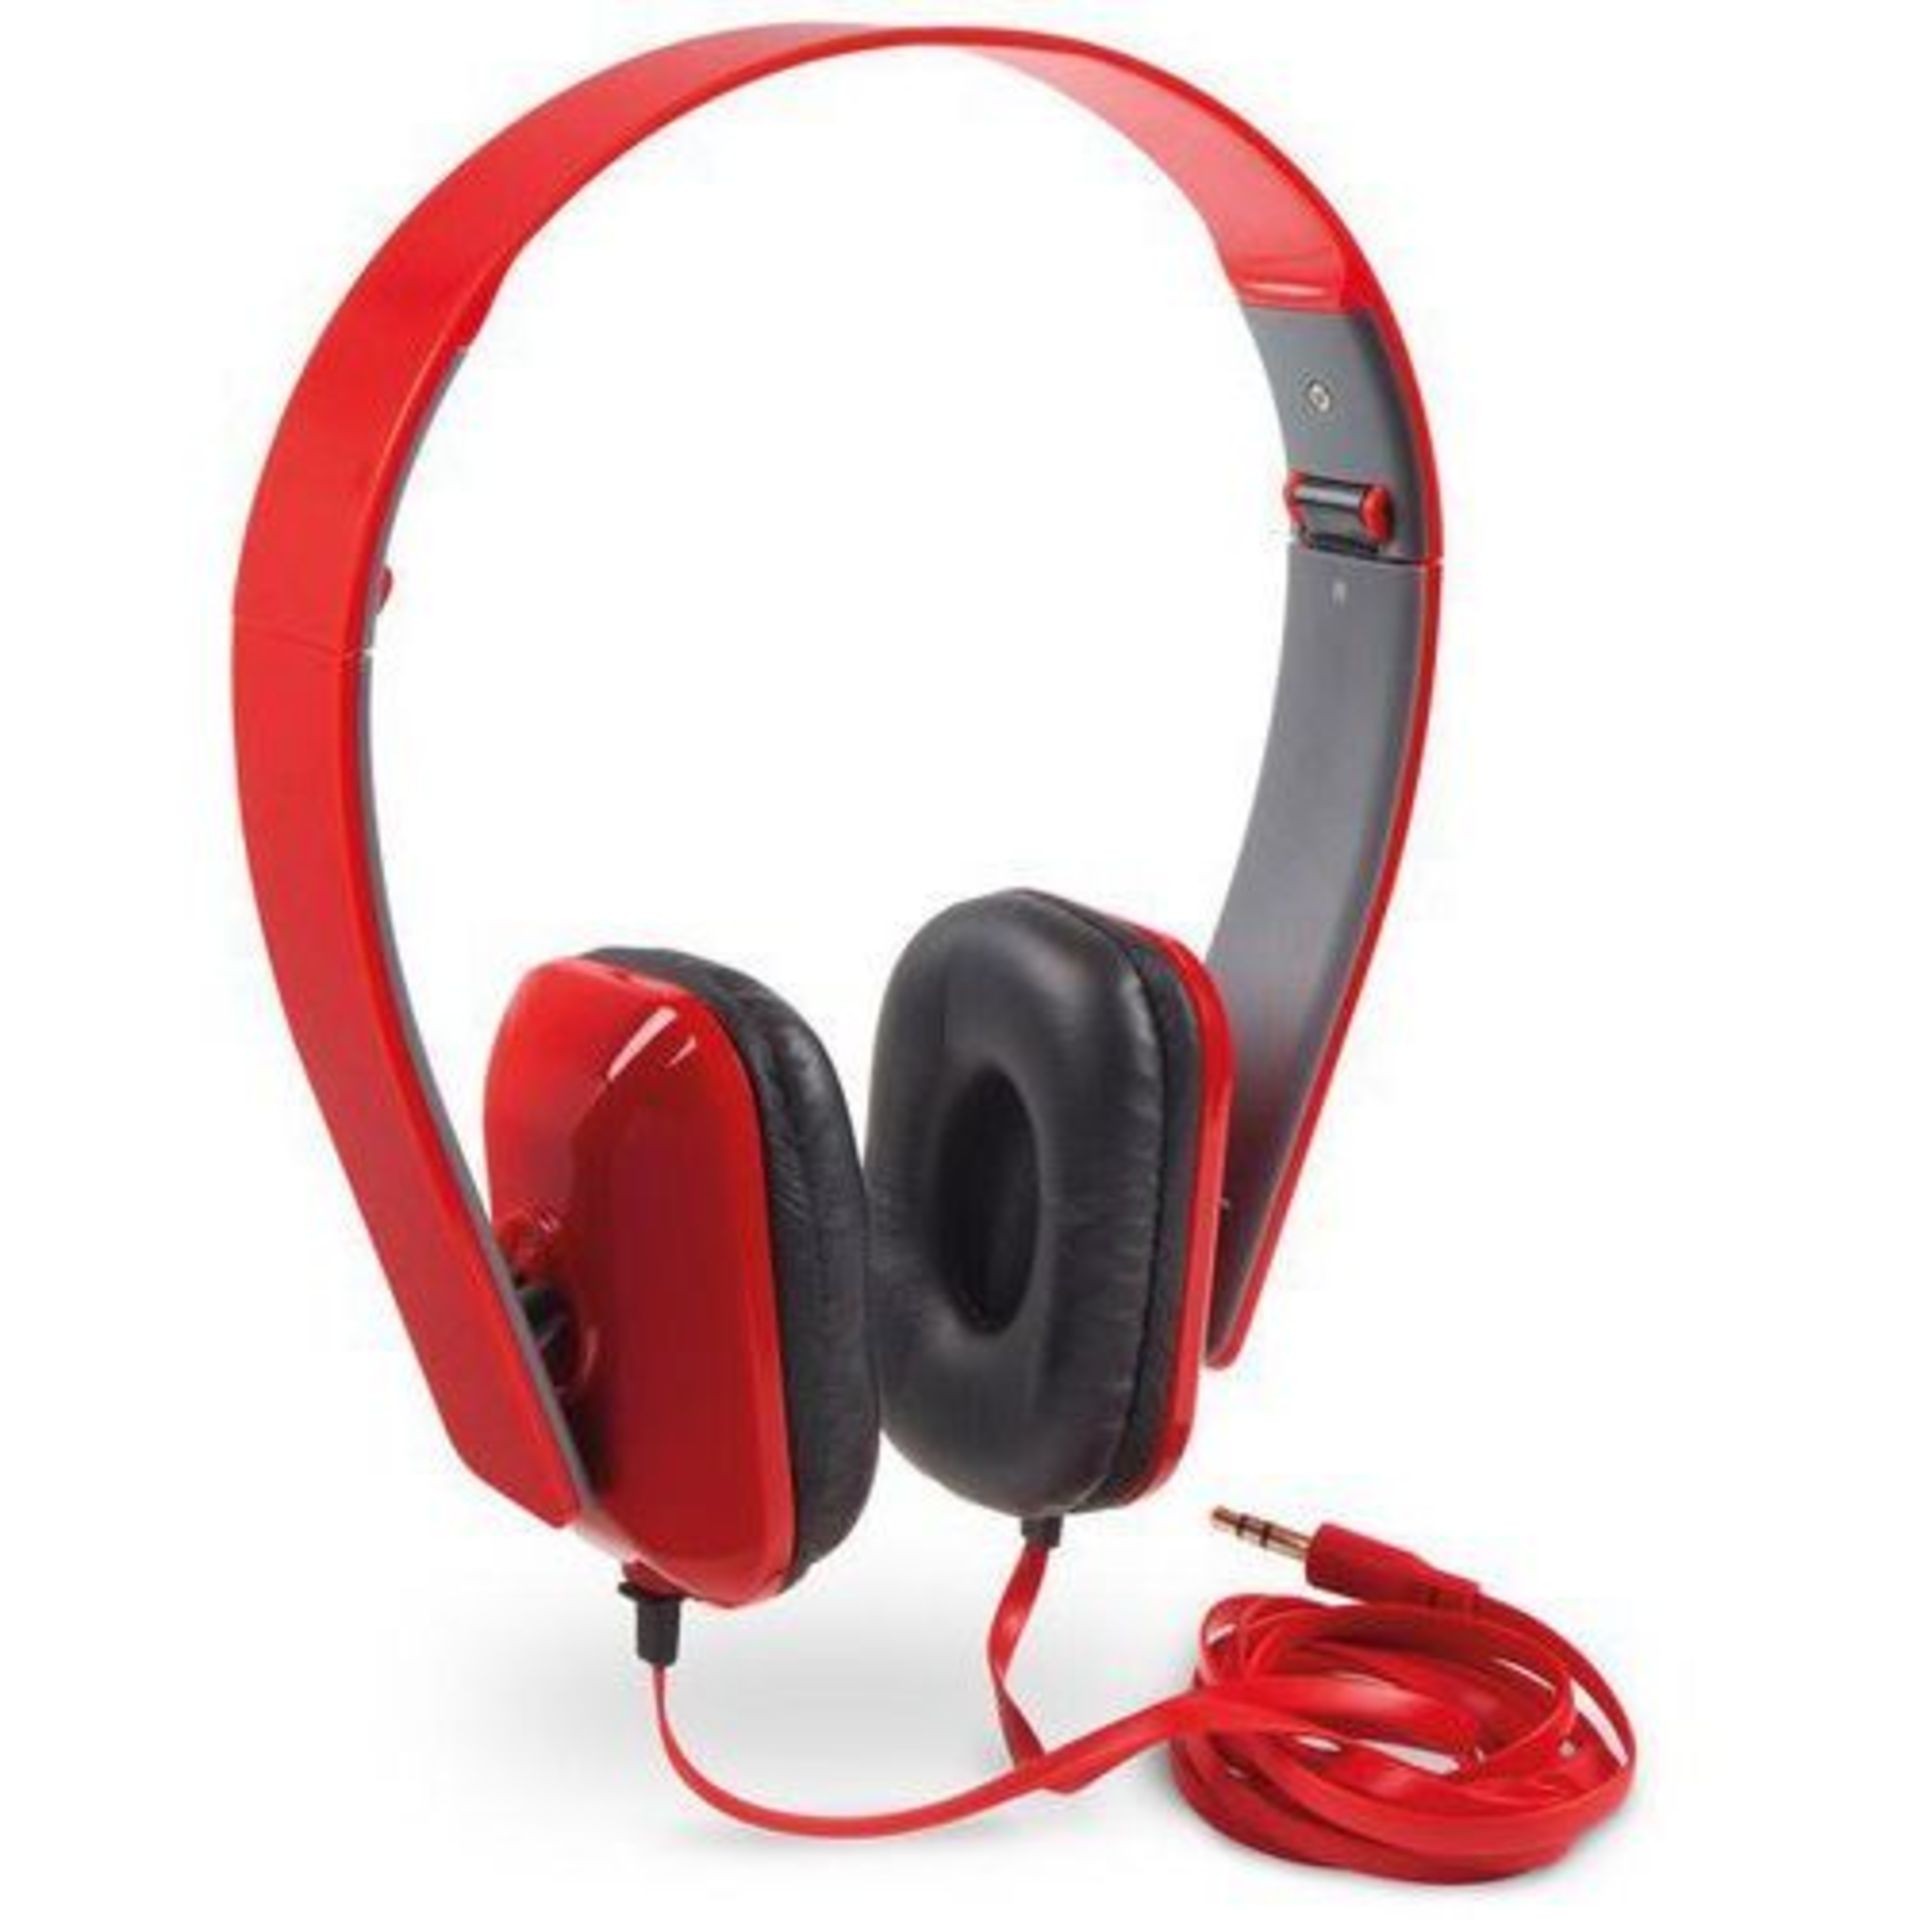 V *TRADE QTY* Brand New Targus Carry & Listen Headphones X 3 YOUR BID PRICE TO BE MULTIPLIED BY